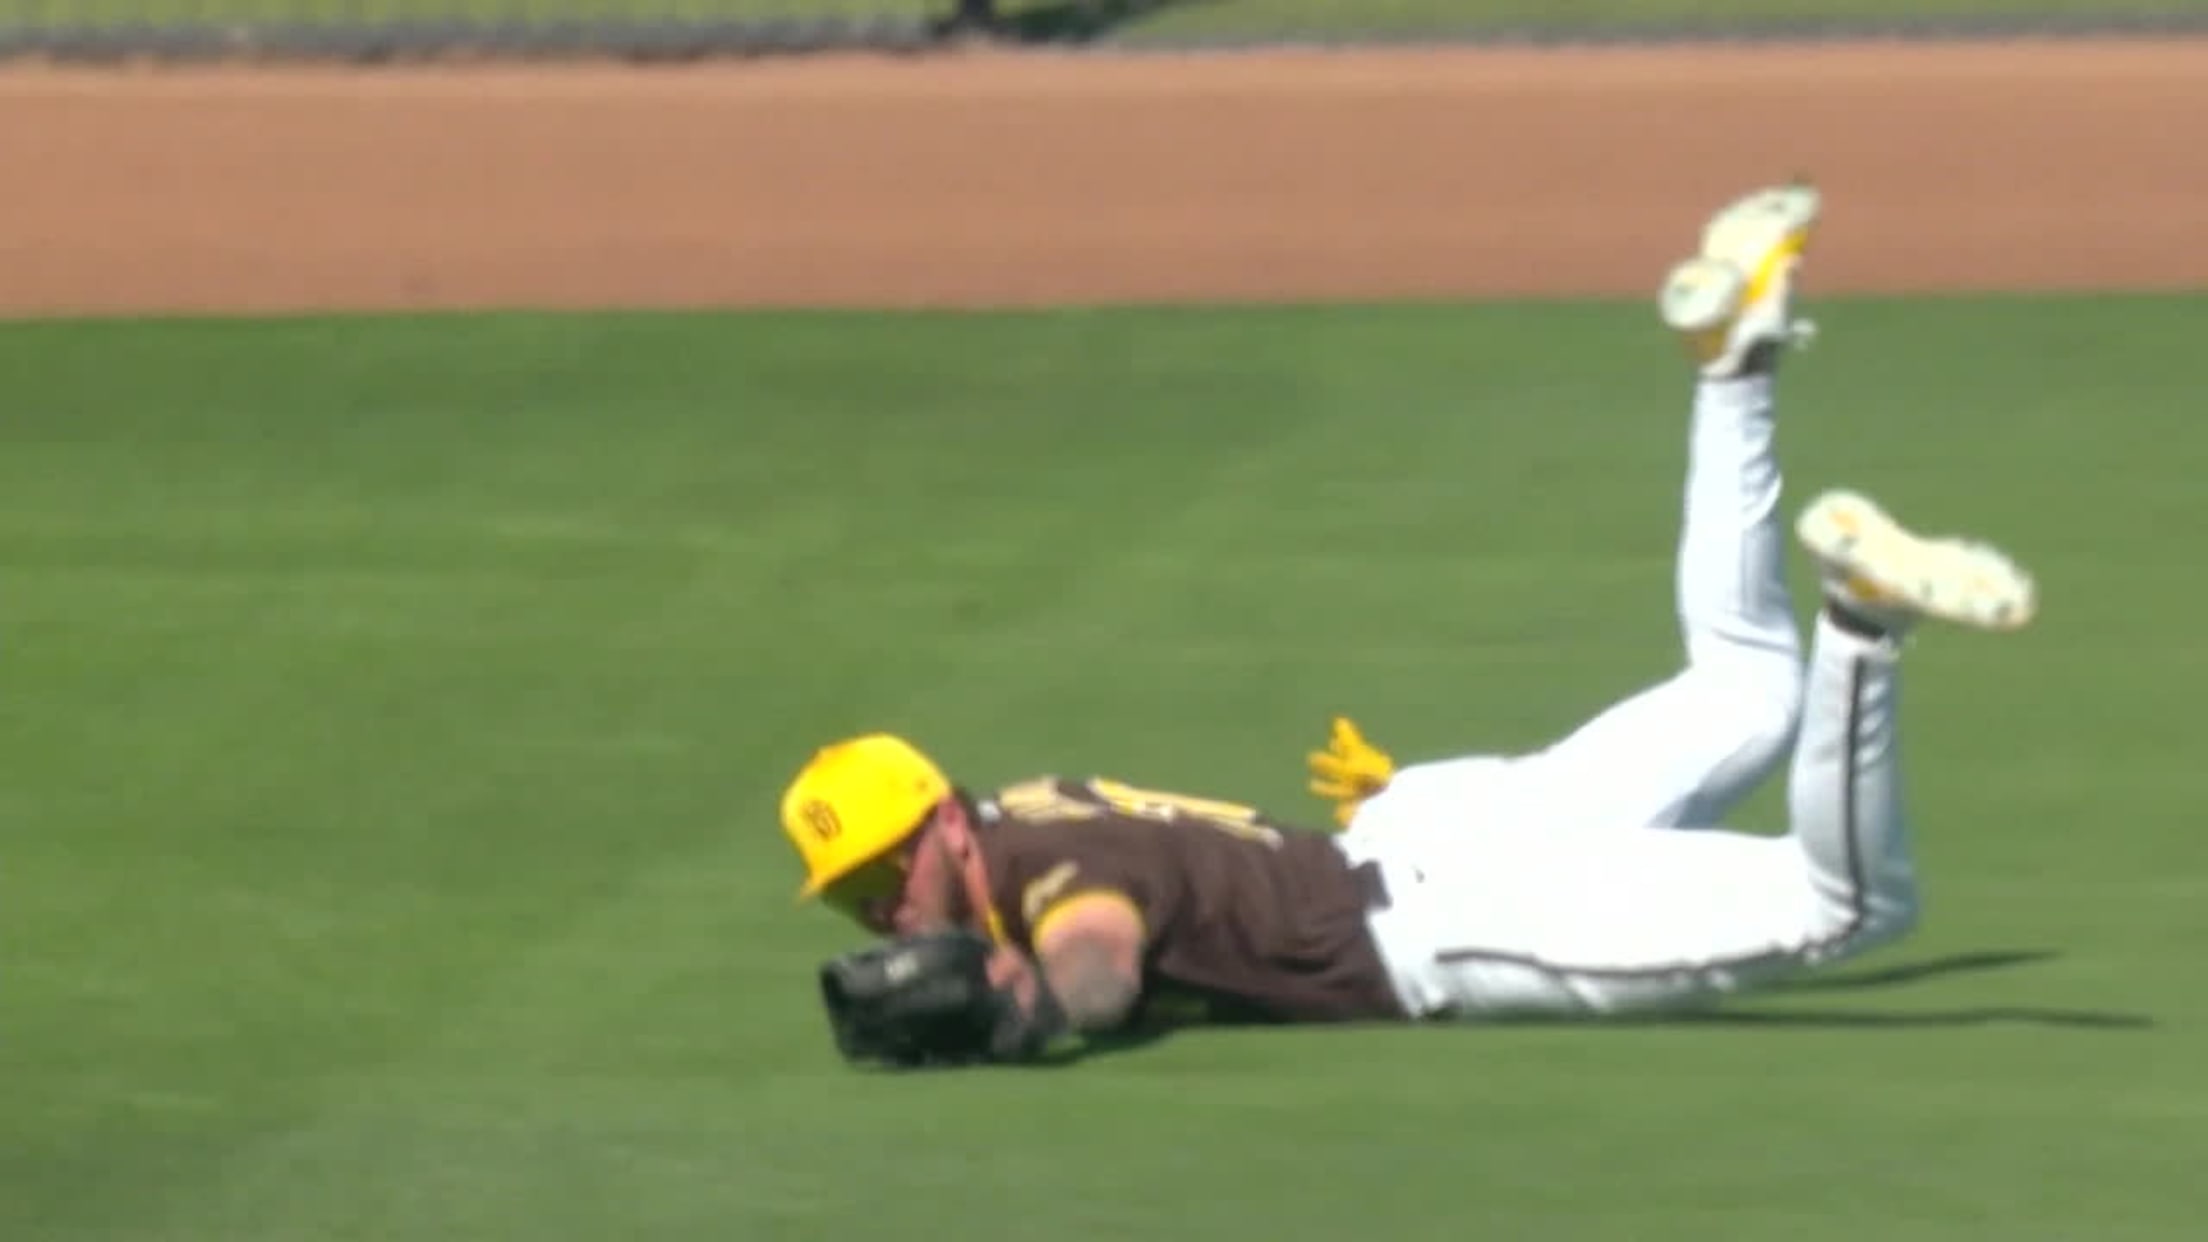 Jackson Merrill makes a diving catch in left